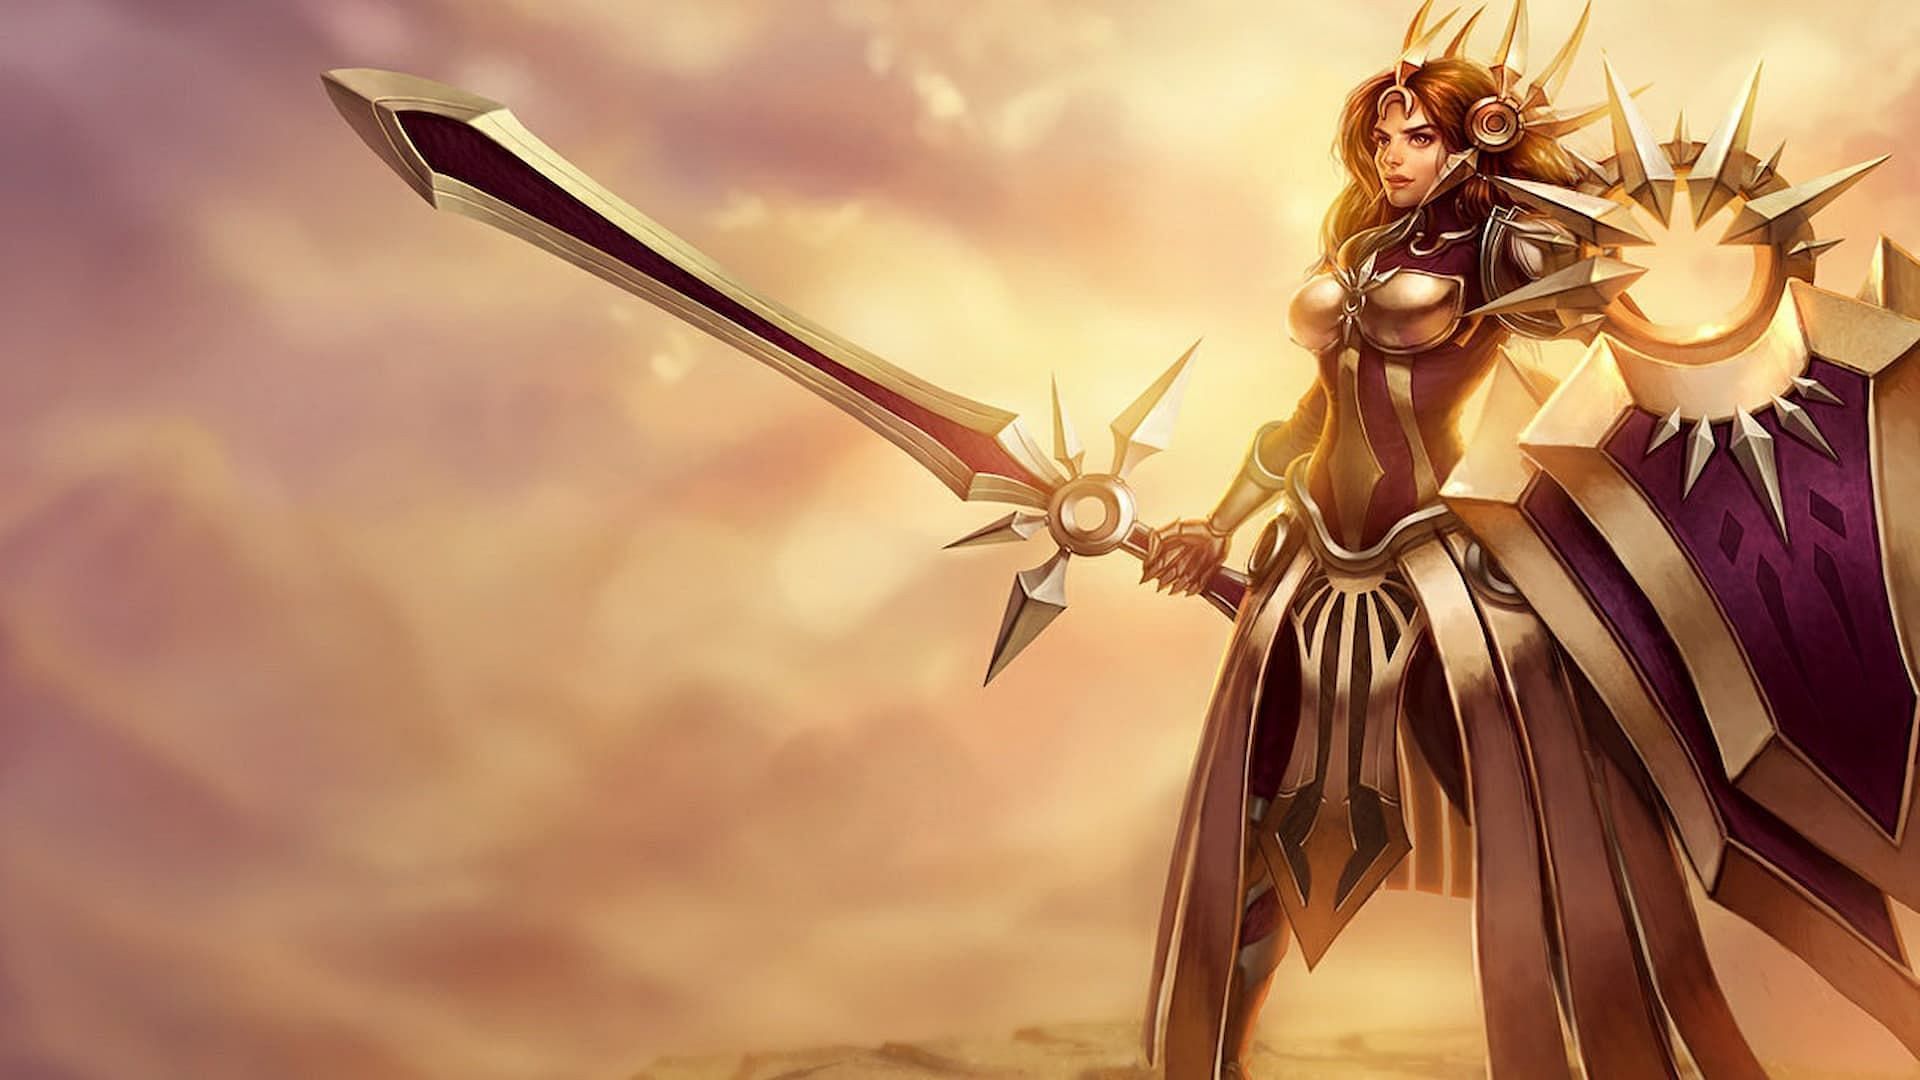 Leona, the Radiant Dawn in League of Legends (Image via Riot Games)